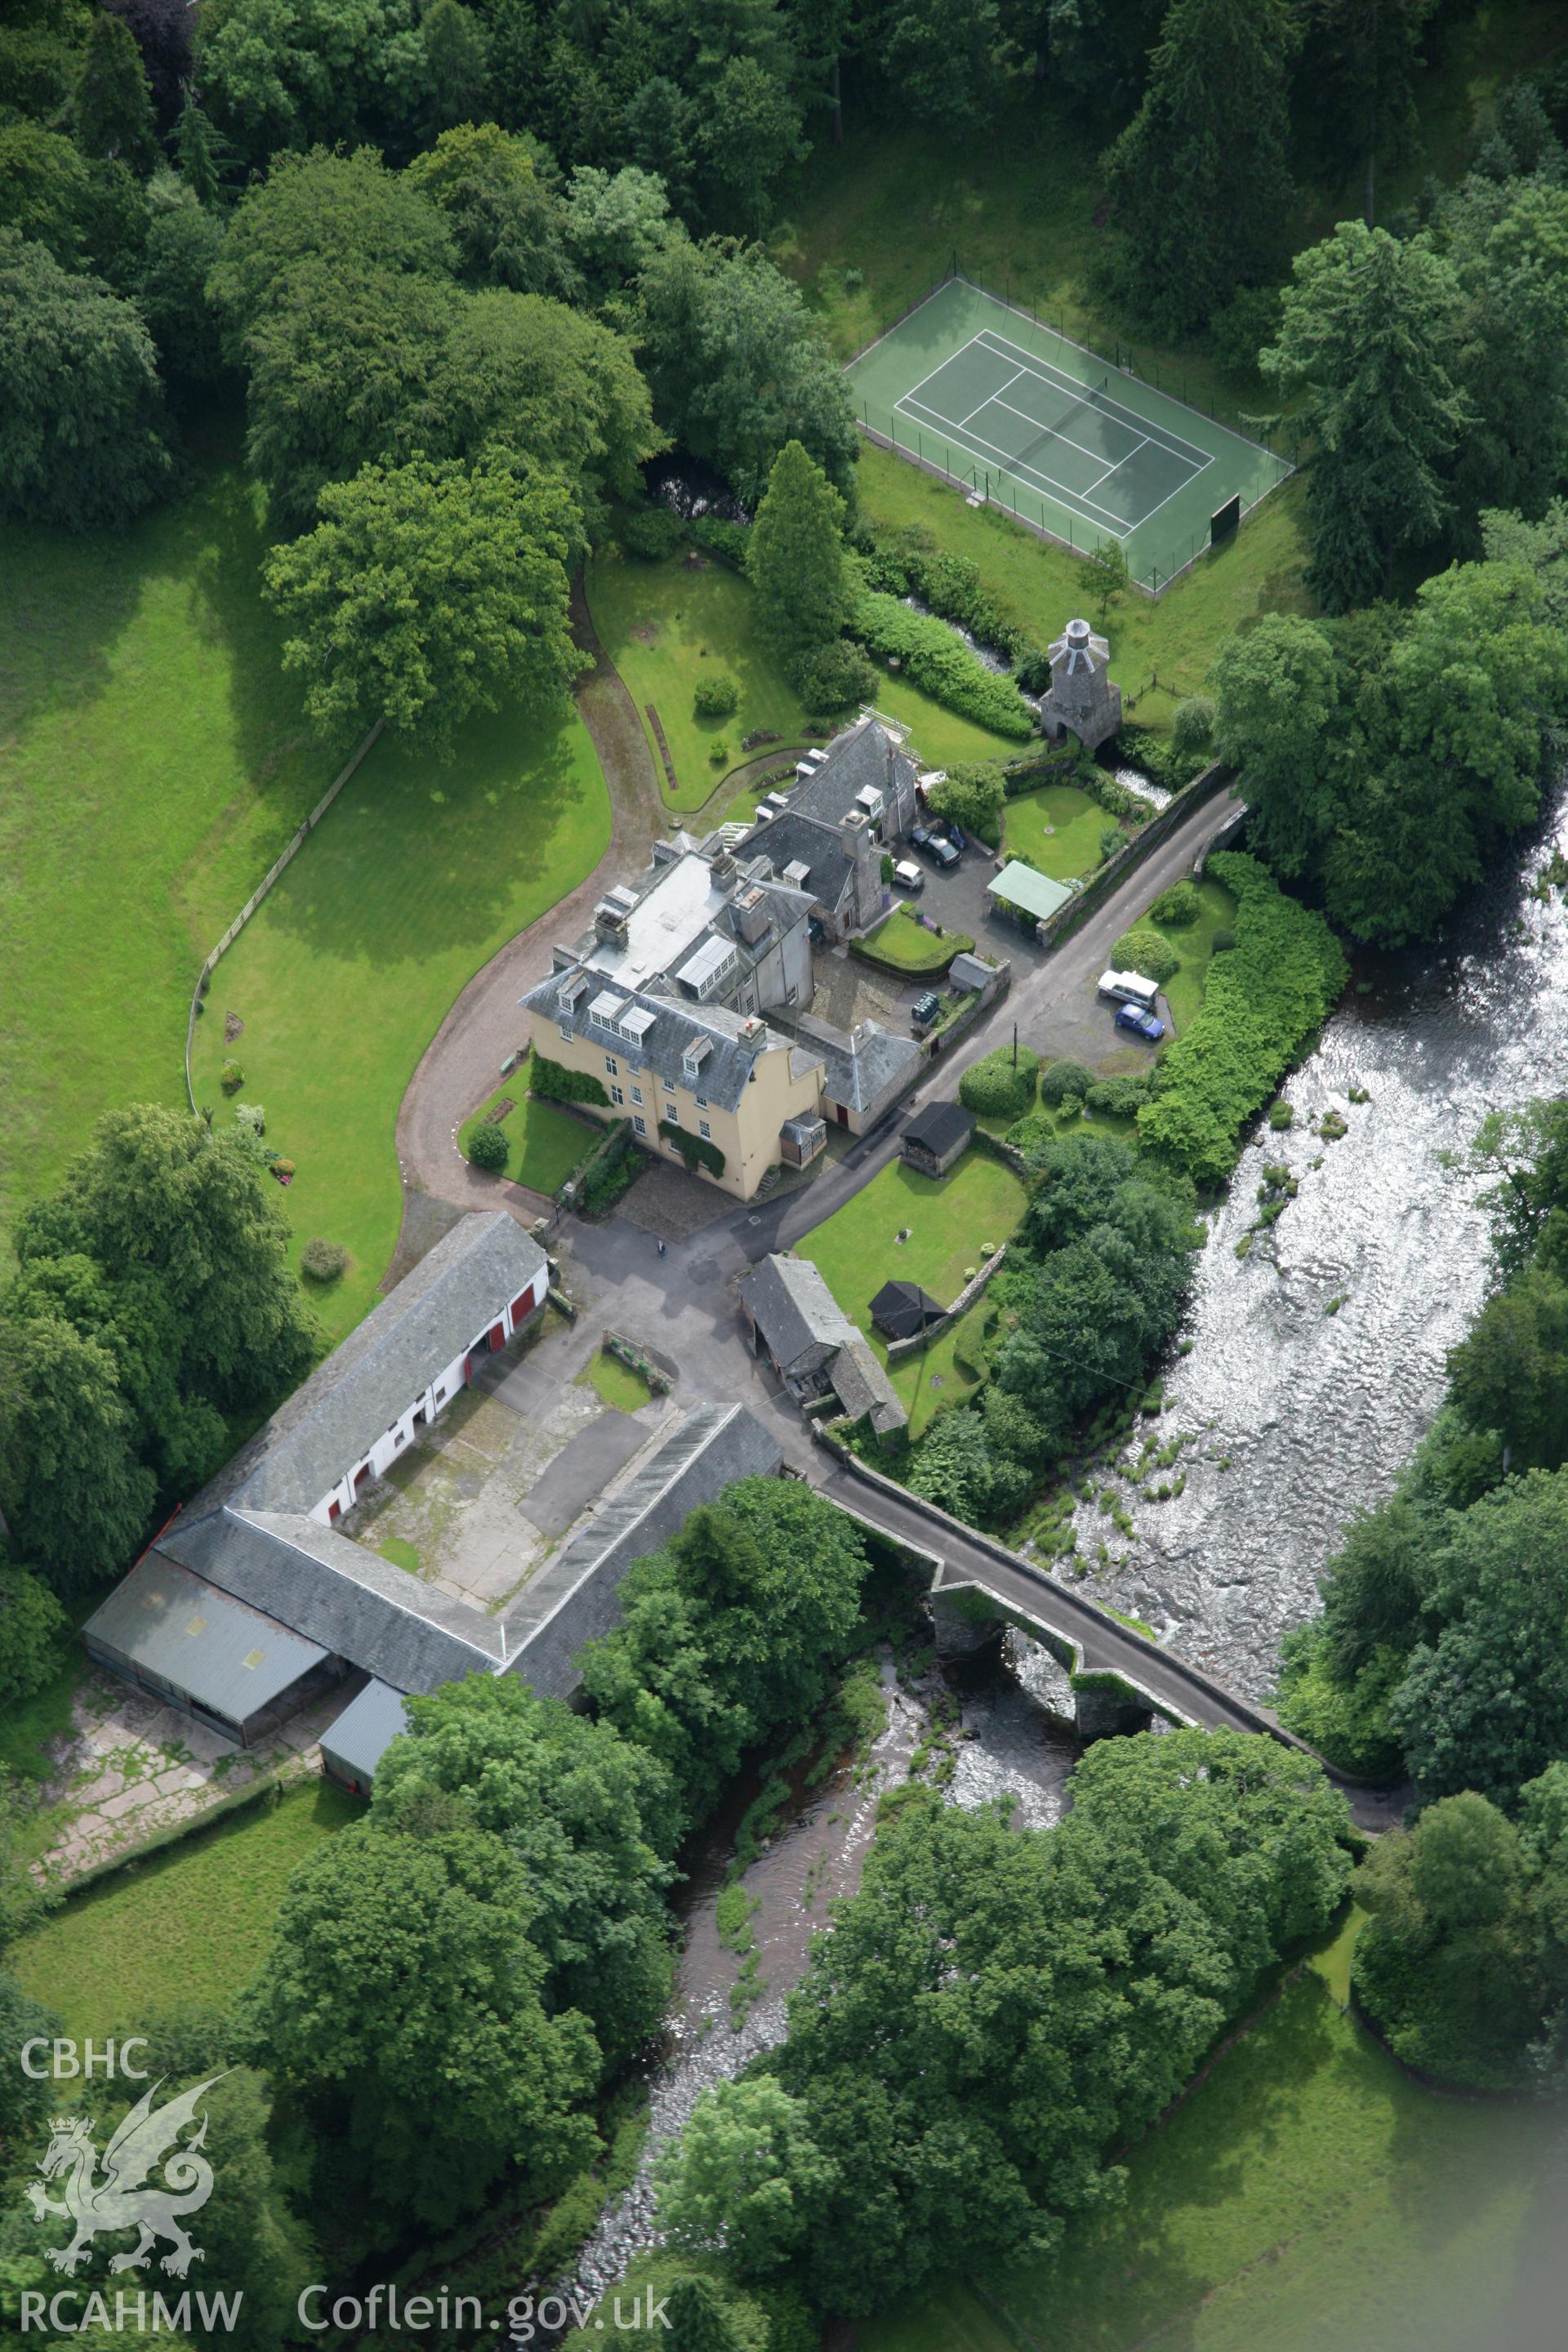 RCAHMW colour oblique aerial photograph of Abercamlais Mansion, Trallong. Taken on 09 July 2007 by Toby Driver